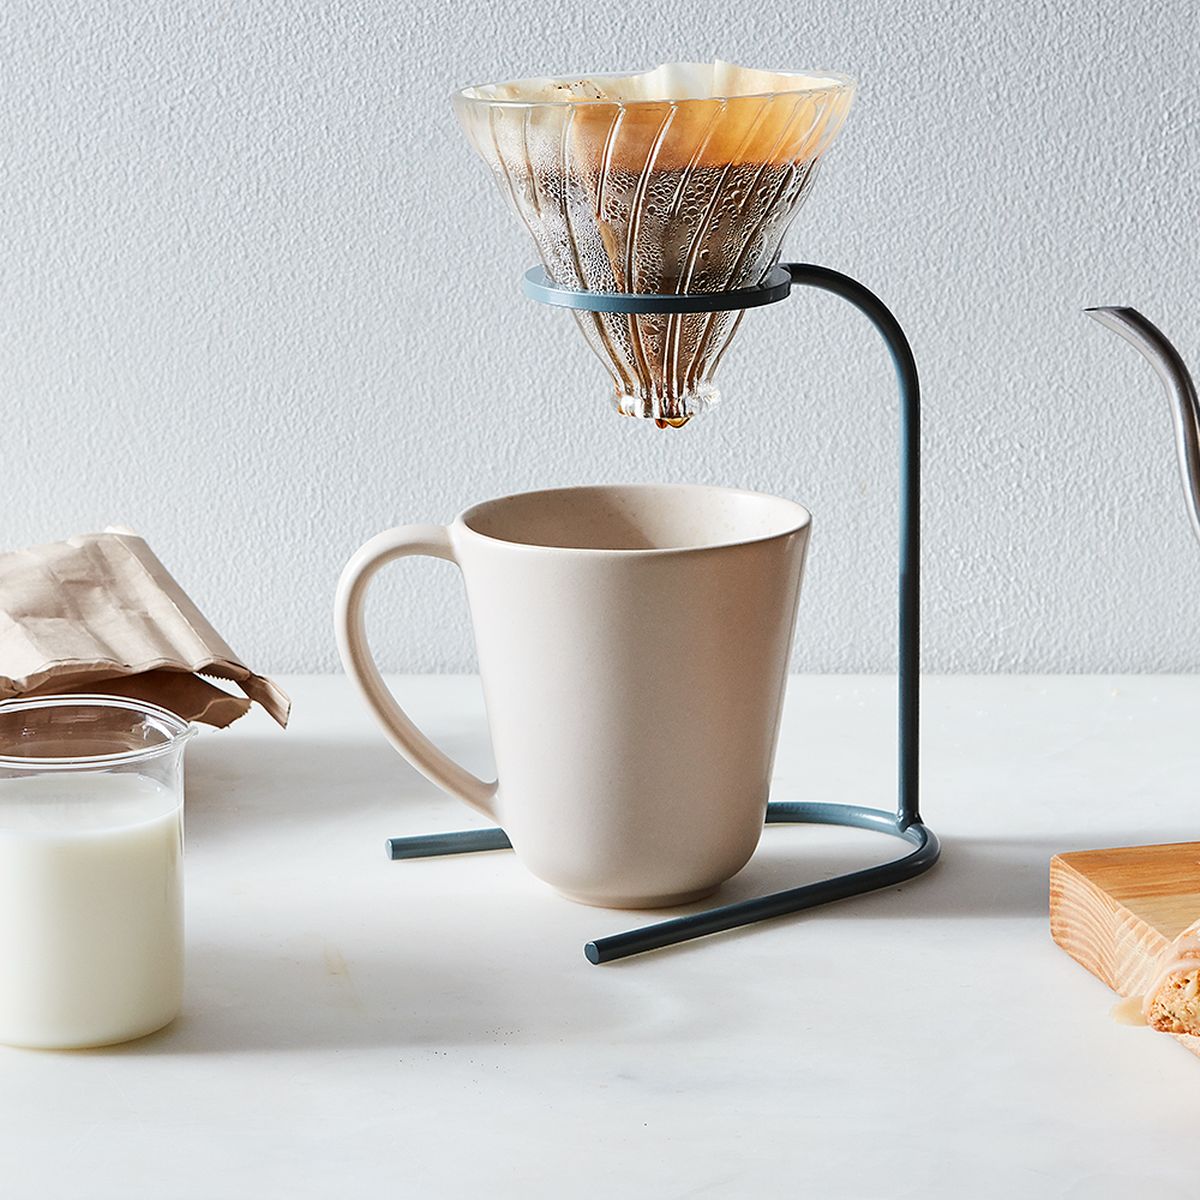 24 Gadgets to Make Your Morning Coffee Taste Better